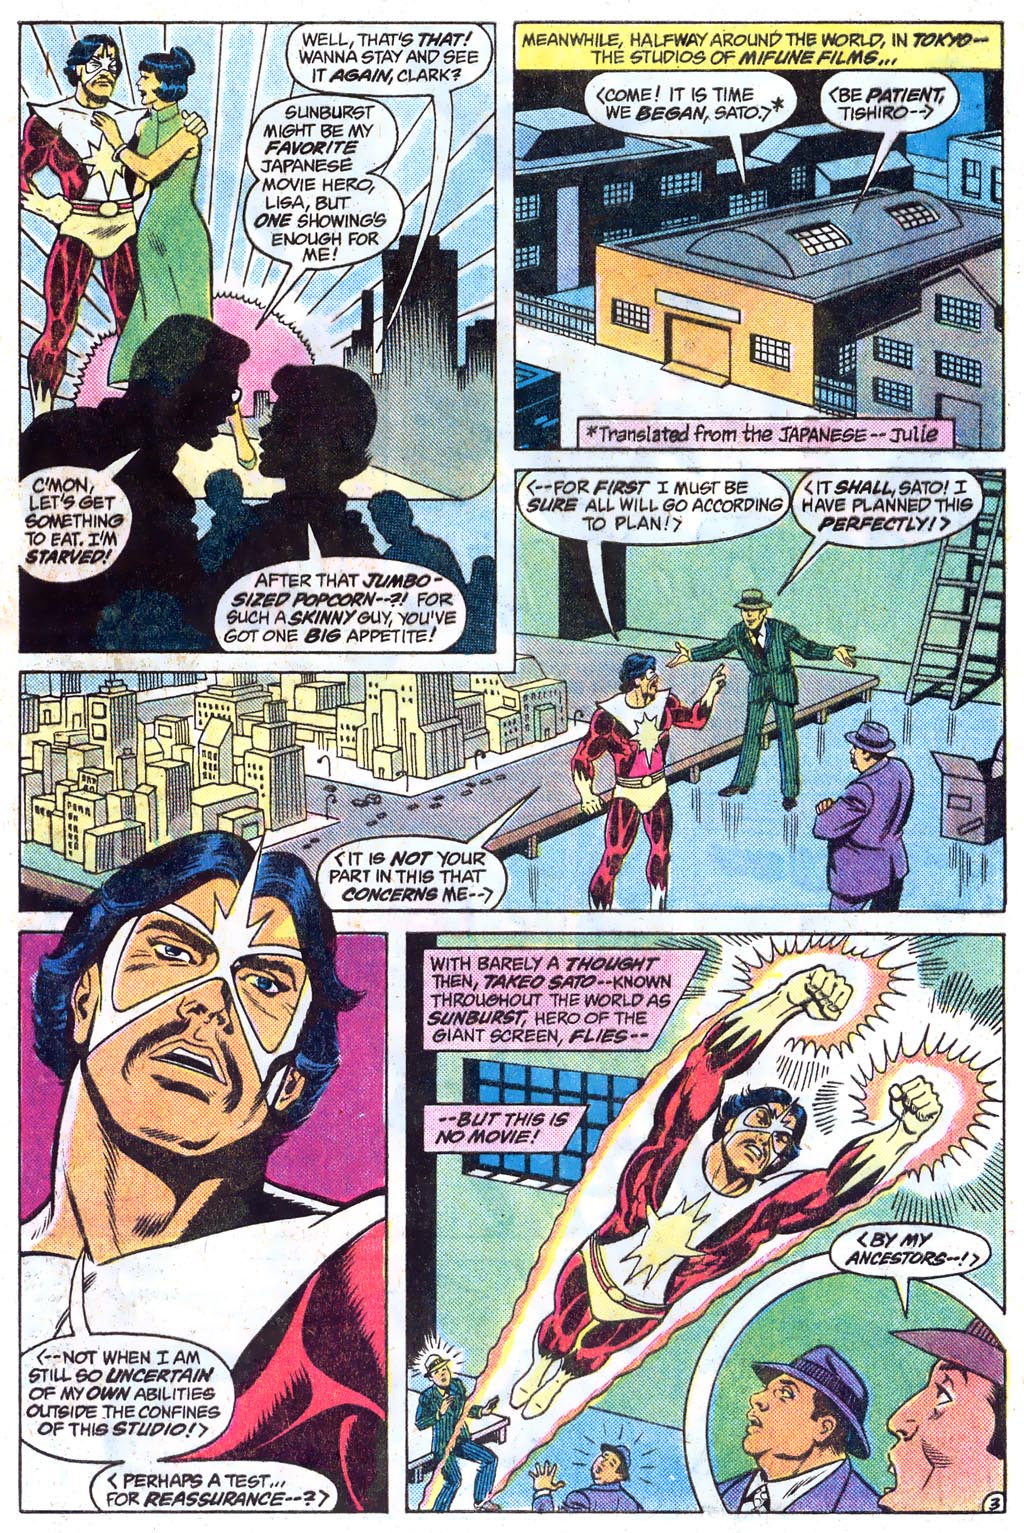 The New Adventures of Superboy 45 Page 4